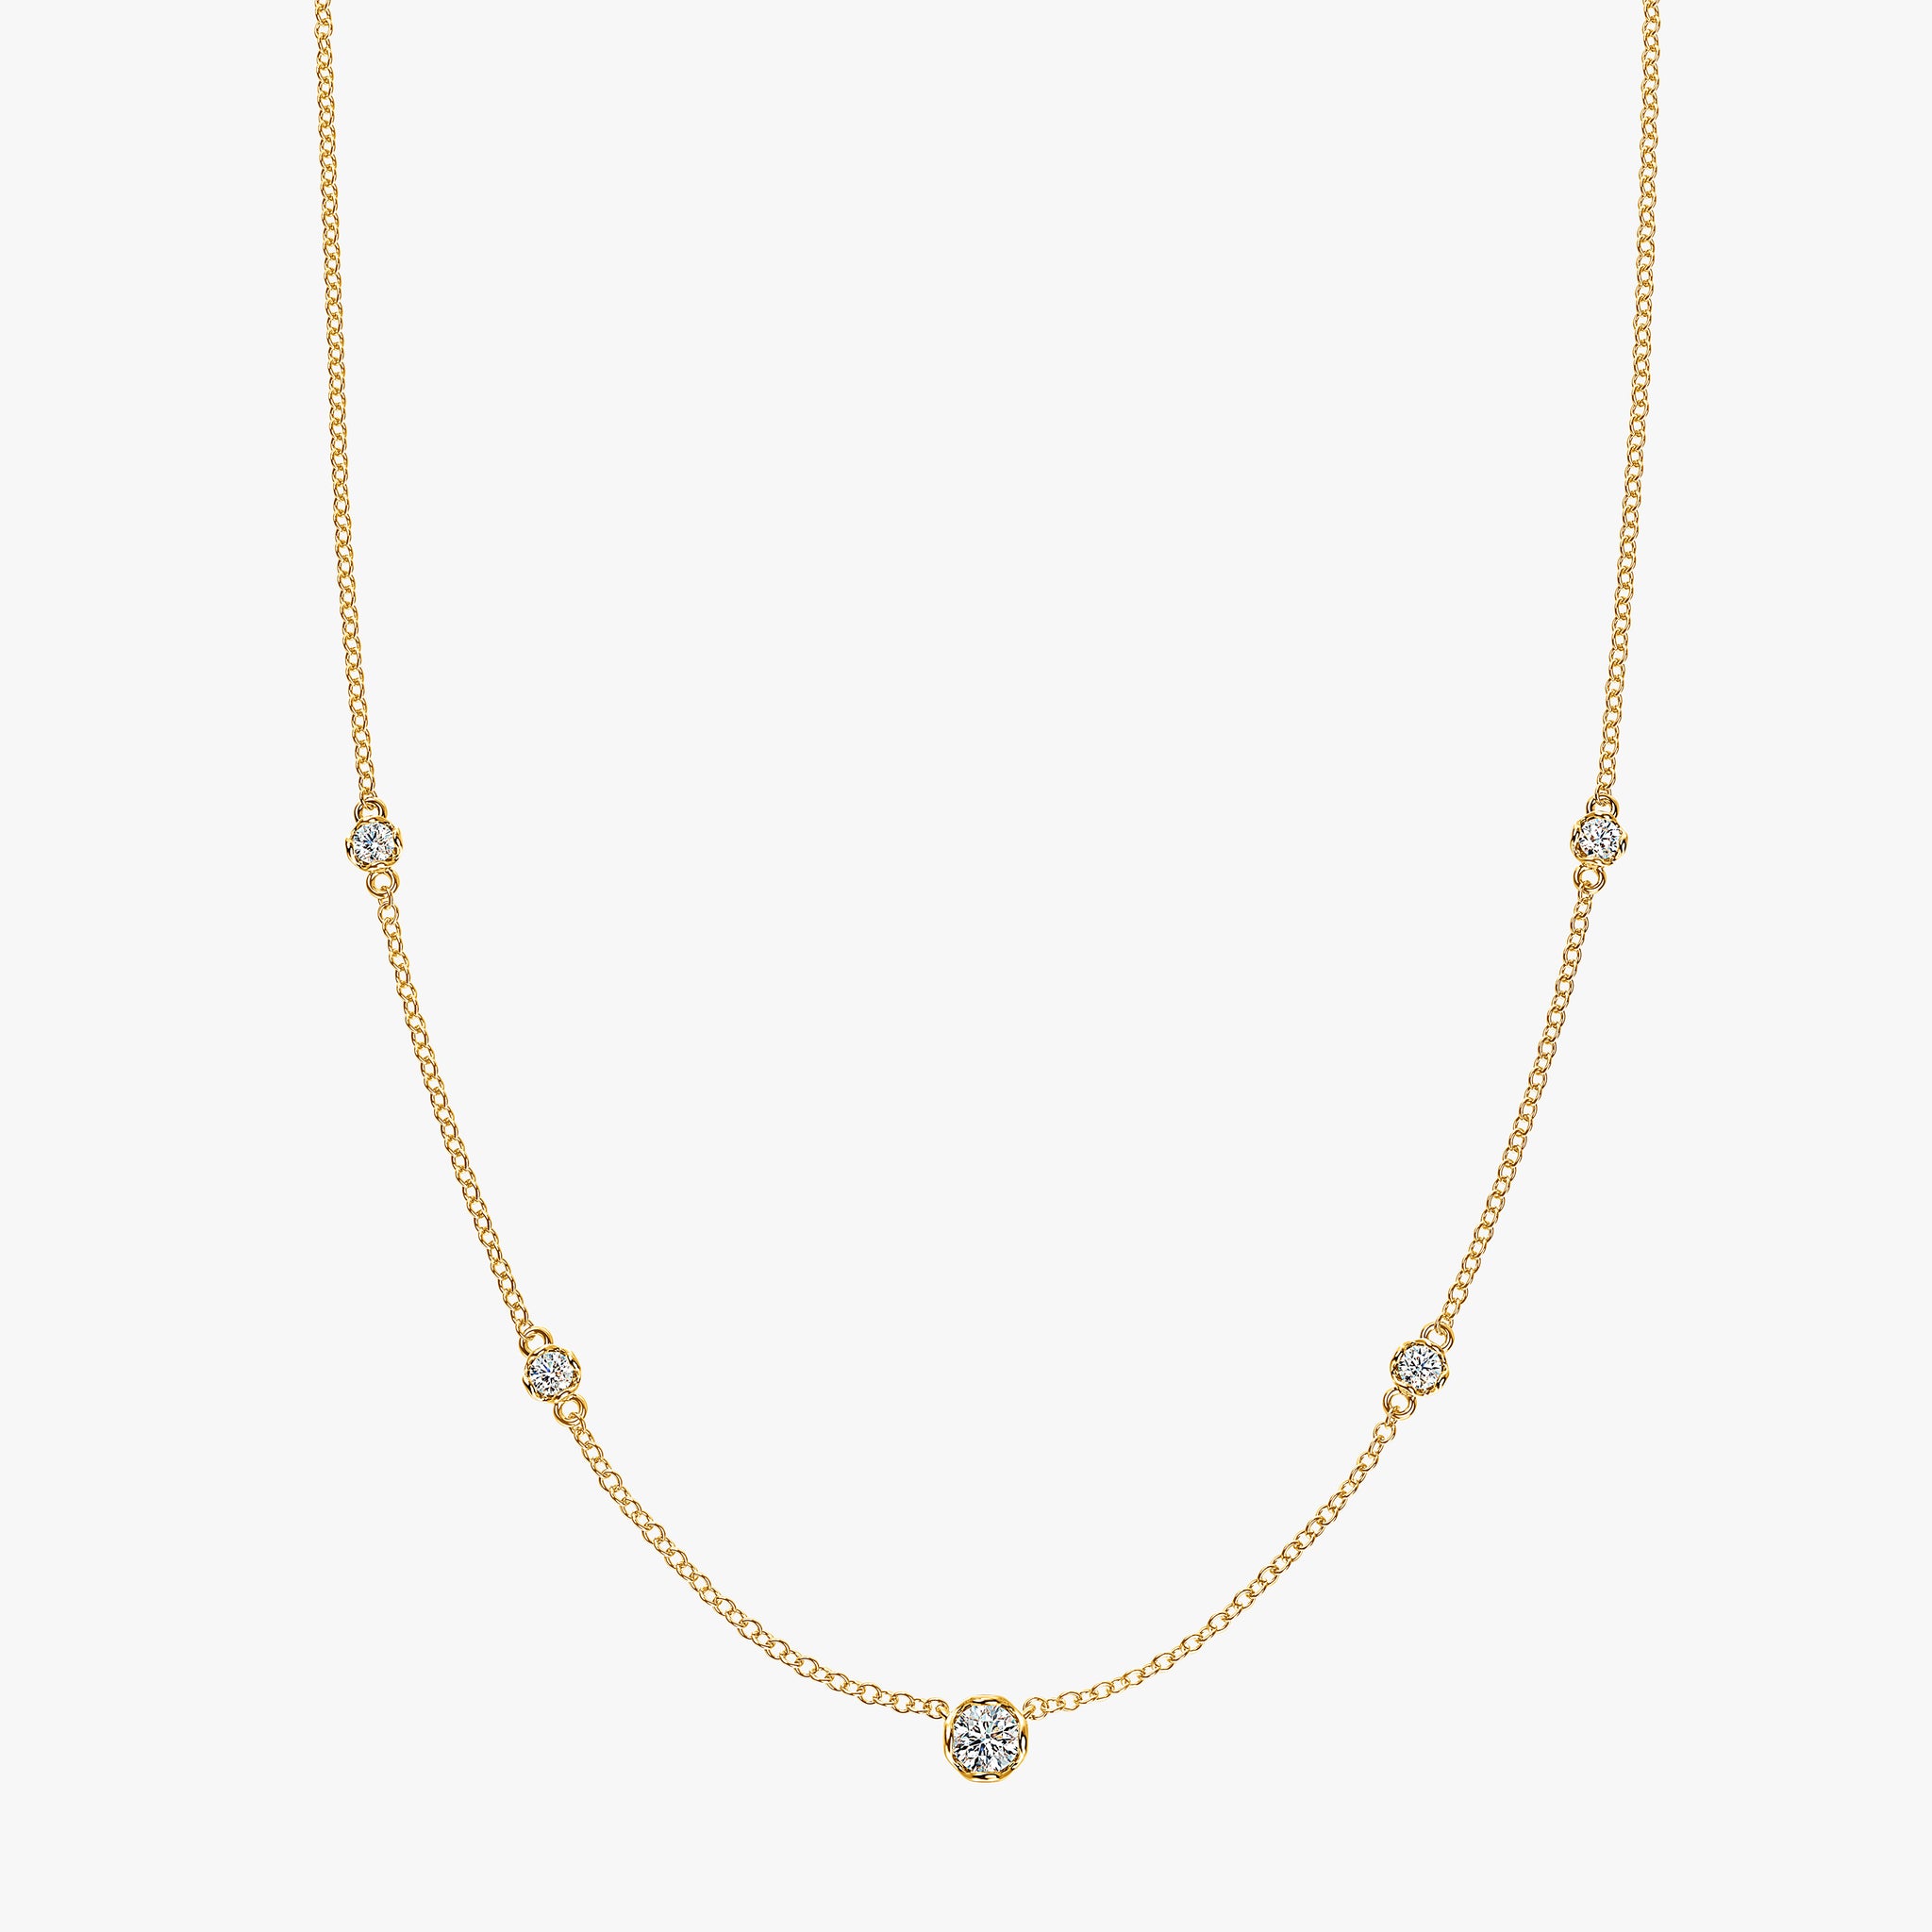 J'EVAR 14KT Yellow Gold By The Yard ALTR Lab Grown Diamond Necklace Front View | 0.35 CT